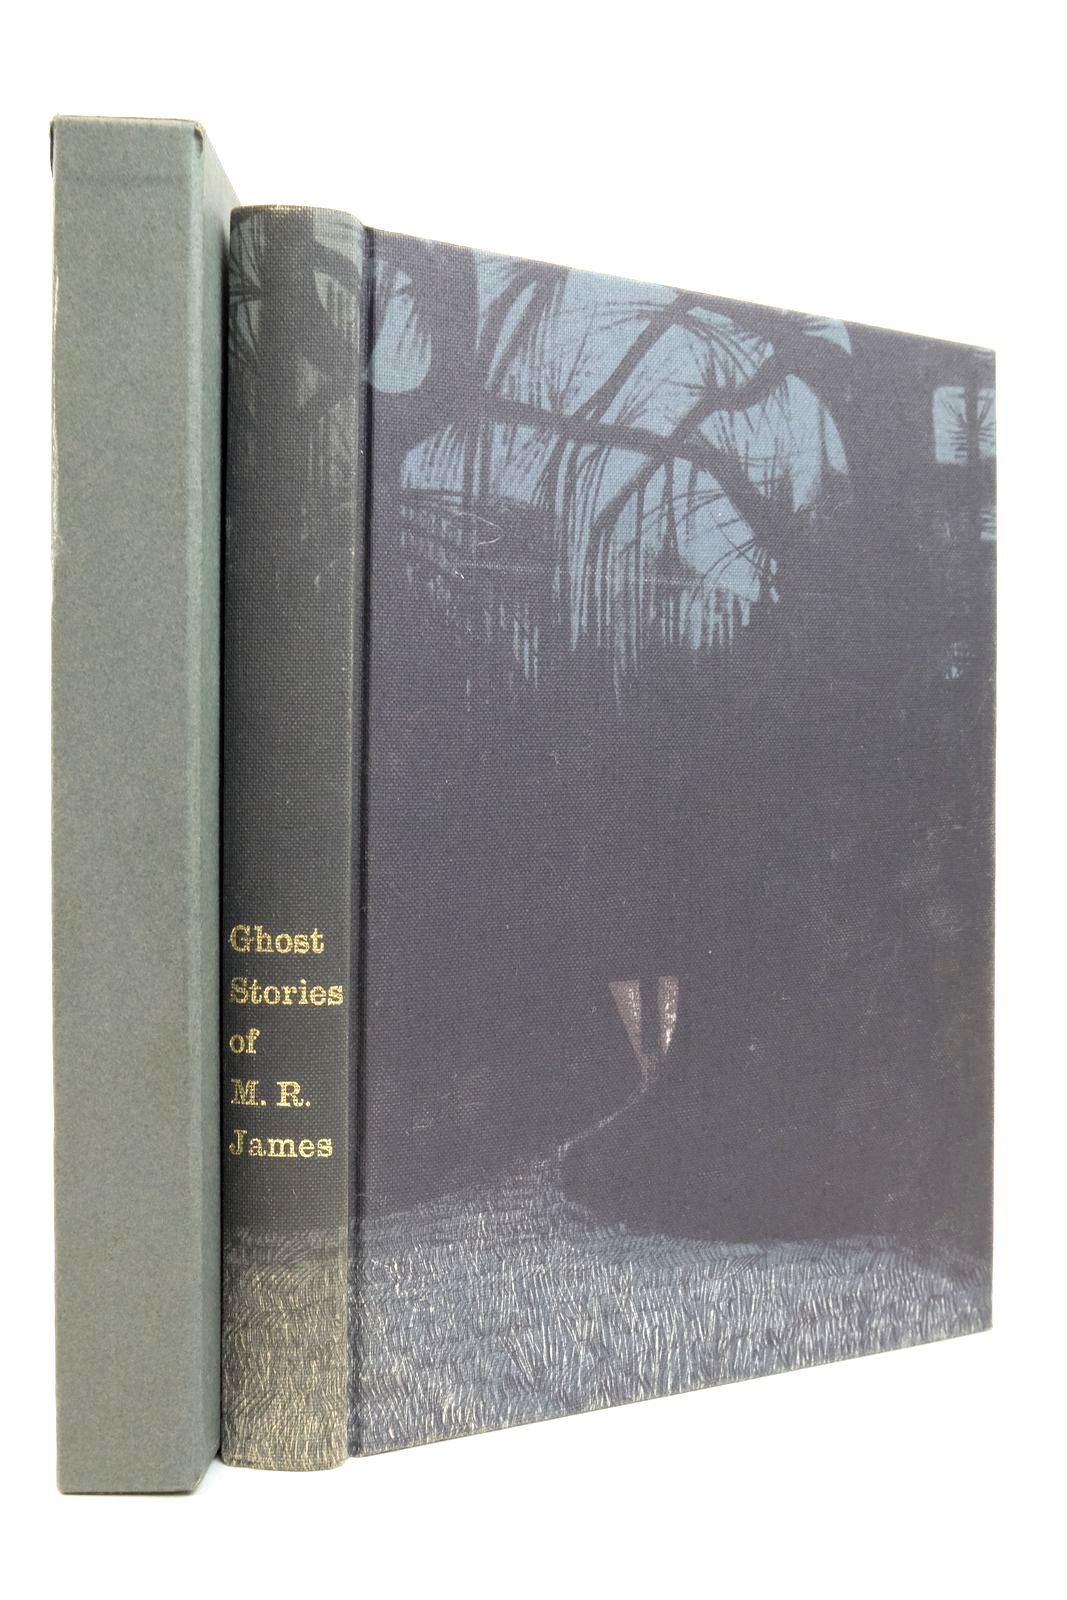 Photo of GHOST STORIES OF M.R. JAMES written by James, M.R. Kneale, Nigel illustrated by Keeping, Charles published by Folio Society (STOCK CODE: 2138356)  for sale by Stella & Rose's Books